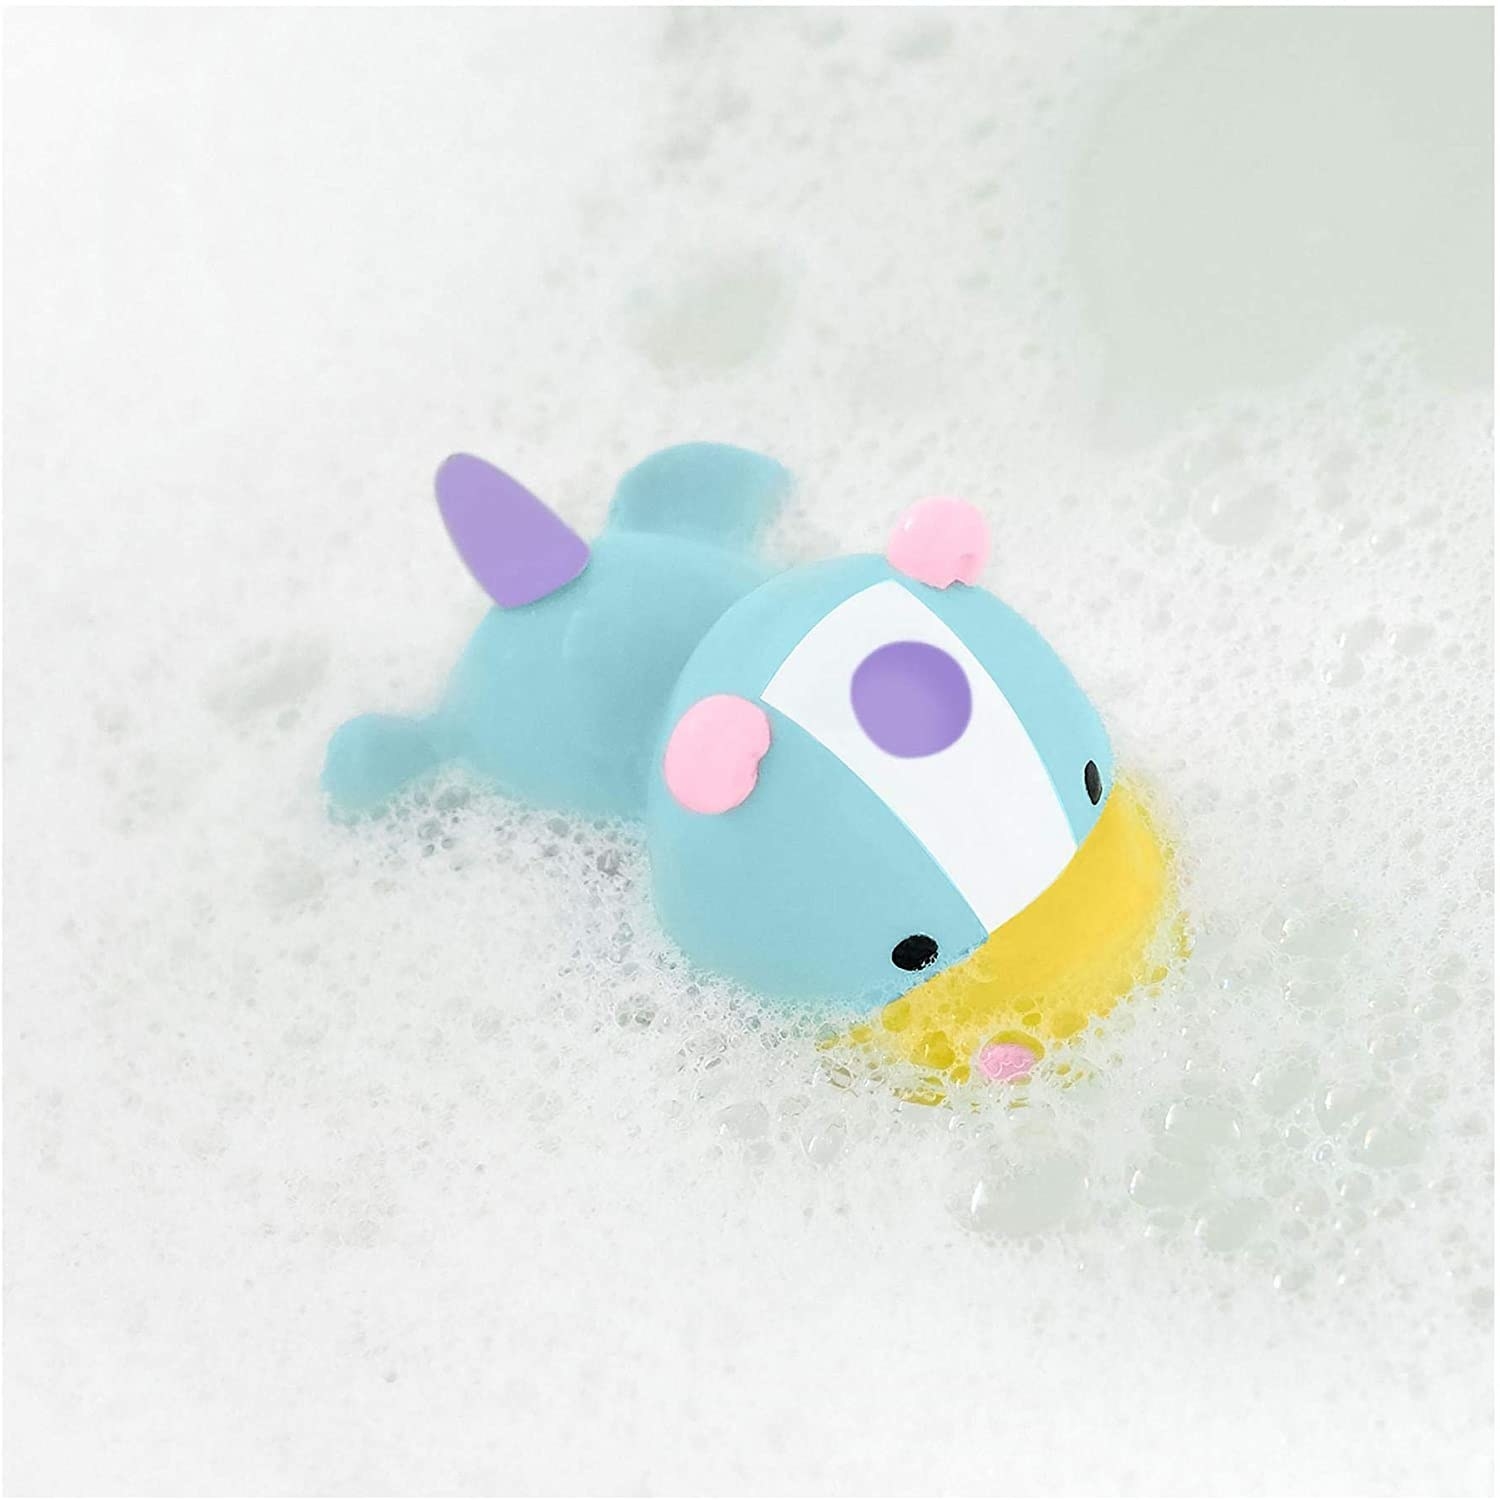 the unicorn toy floating in a bath